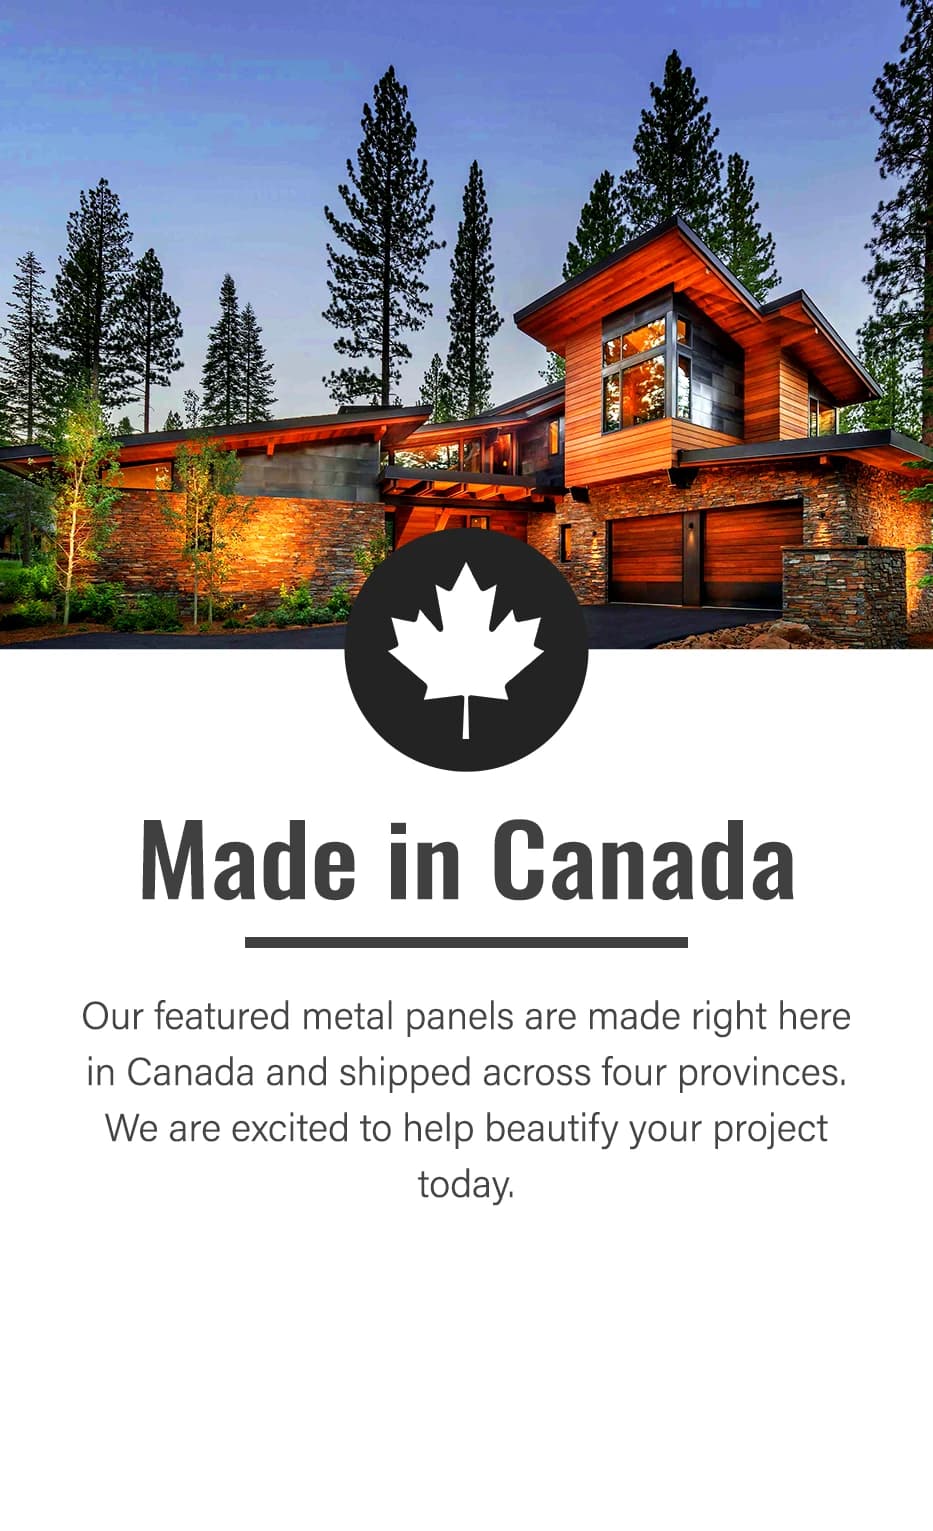 All of our products are made in Canada.